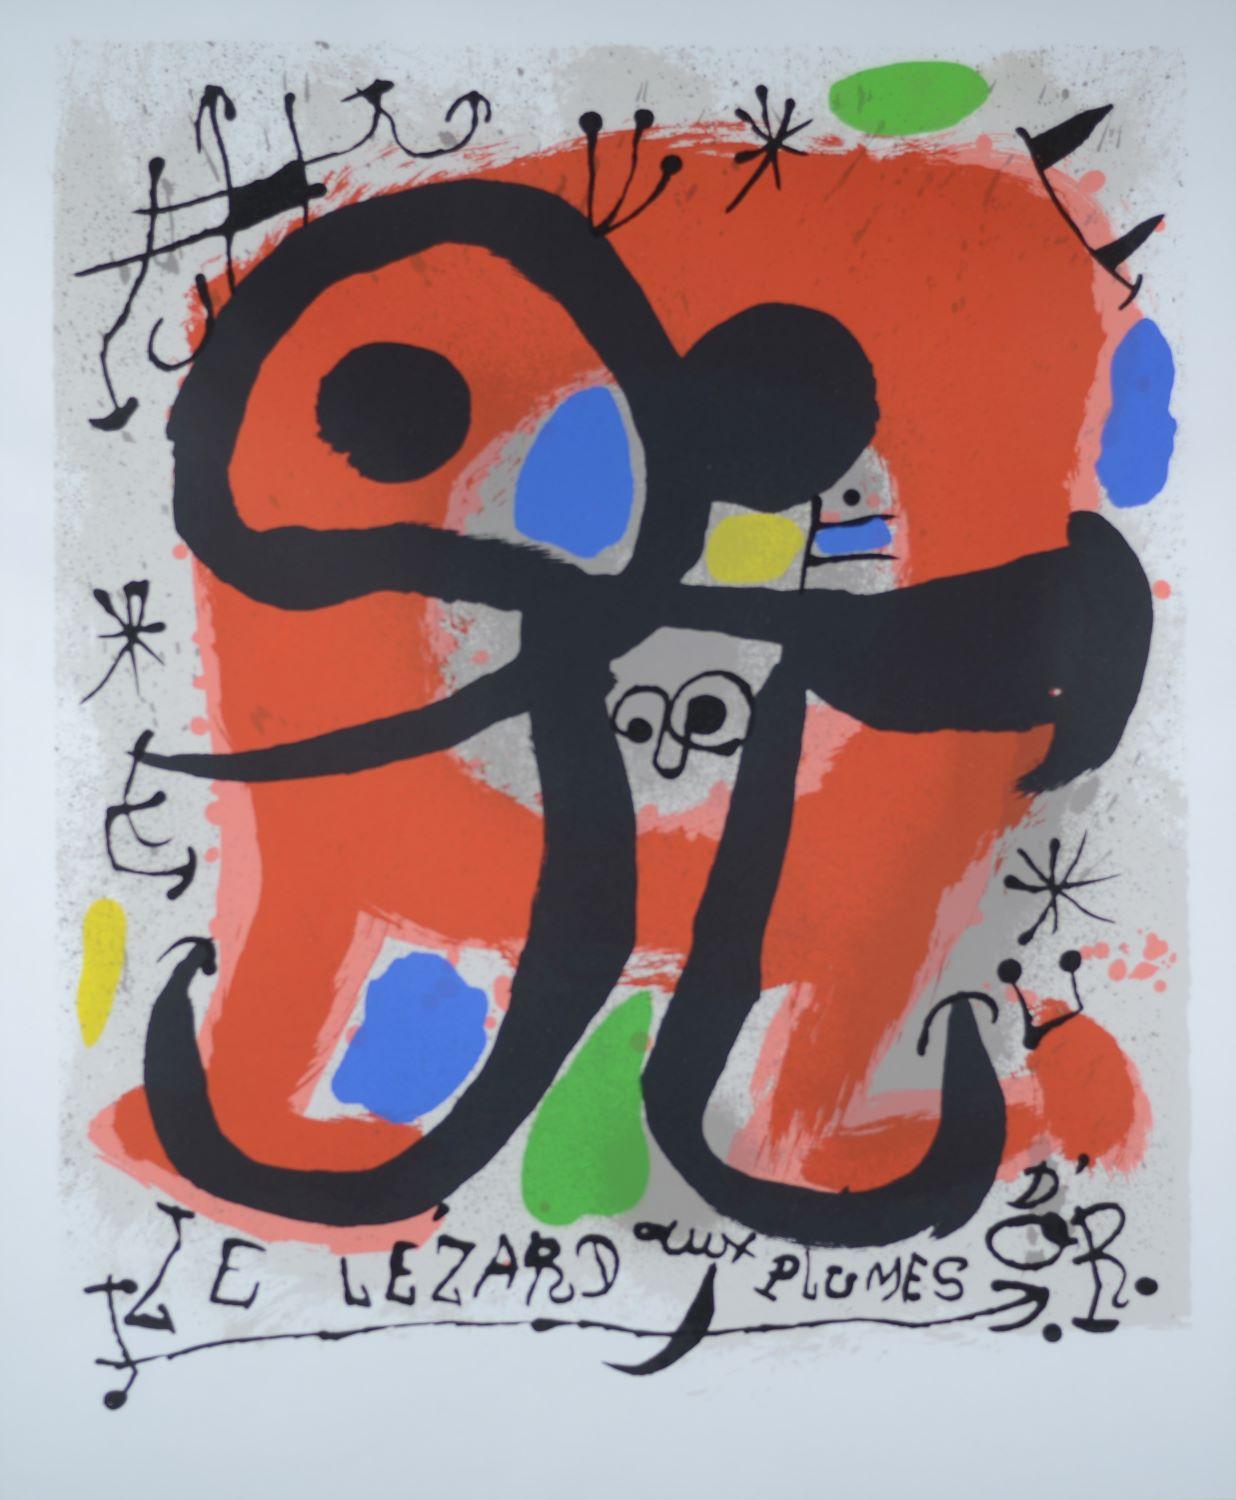 Large bright Miro Lithograph Le Lezard aux Plumes D'Or signed on plate framed